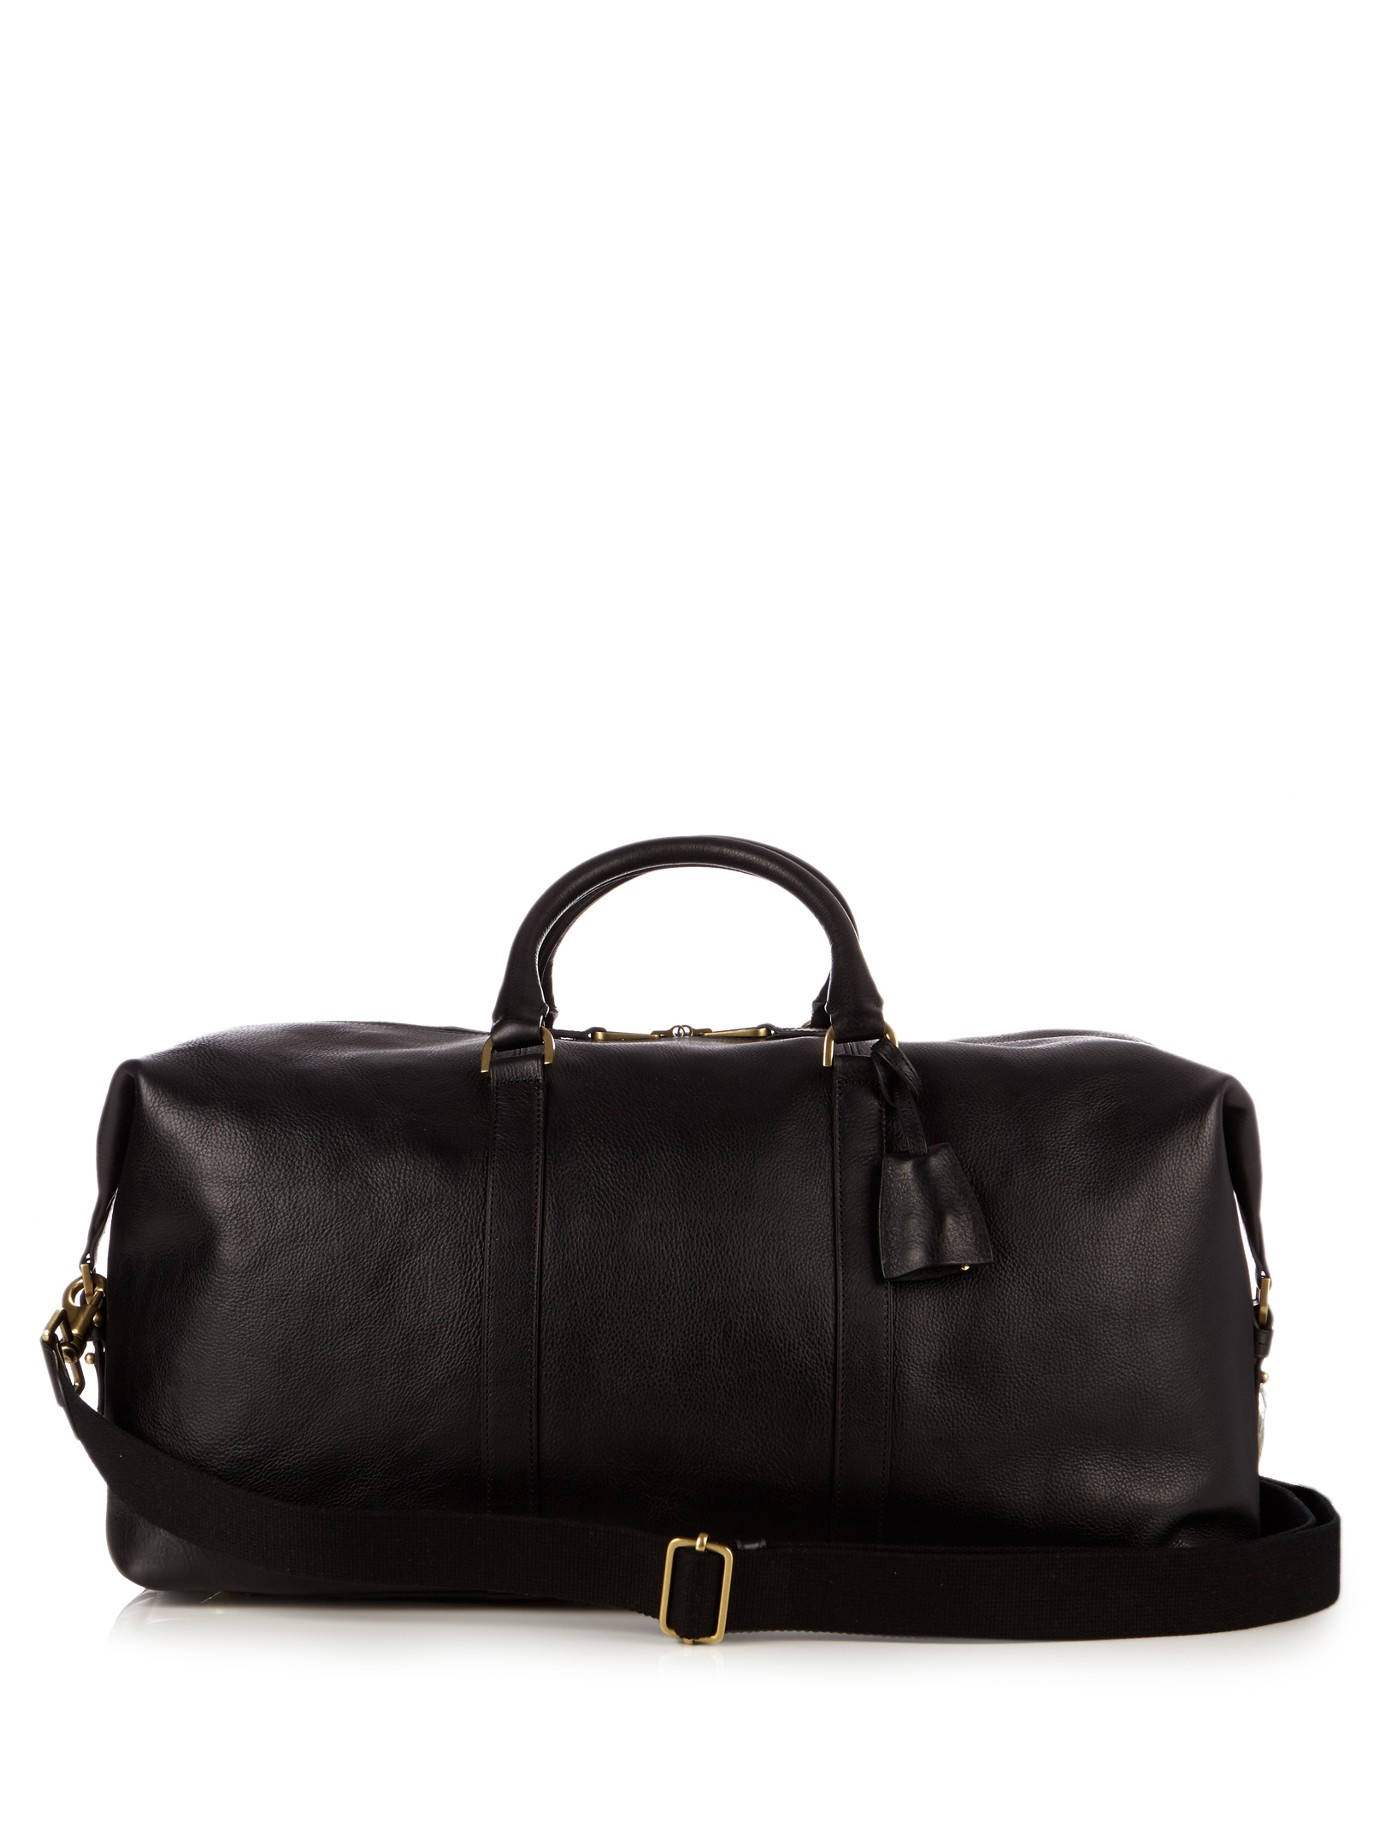 Mulberry Clipper Leather Weekender Bag in Black for Men - Lyst